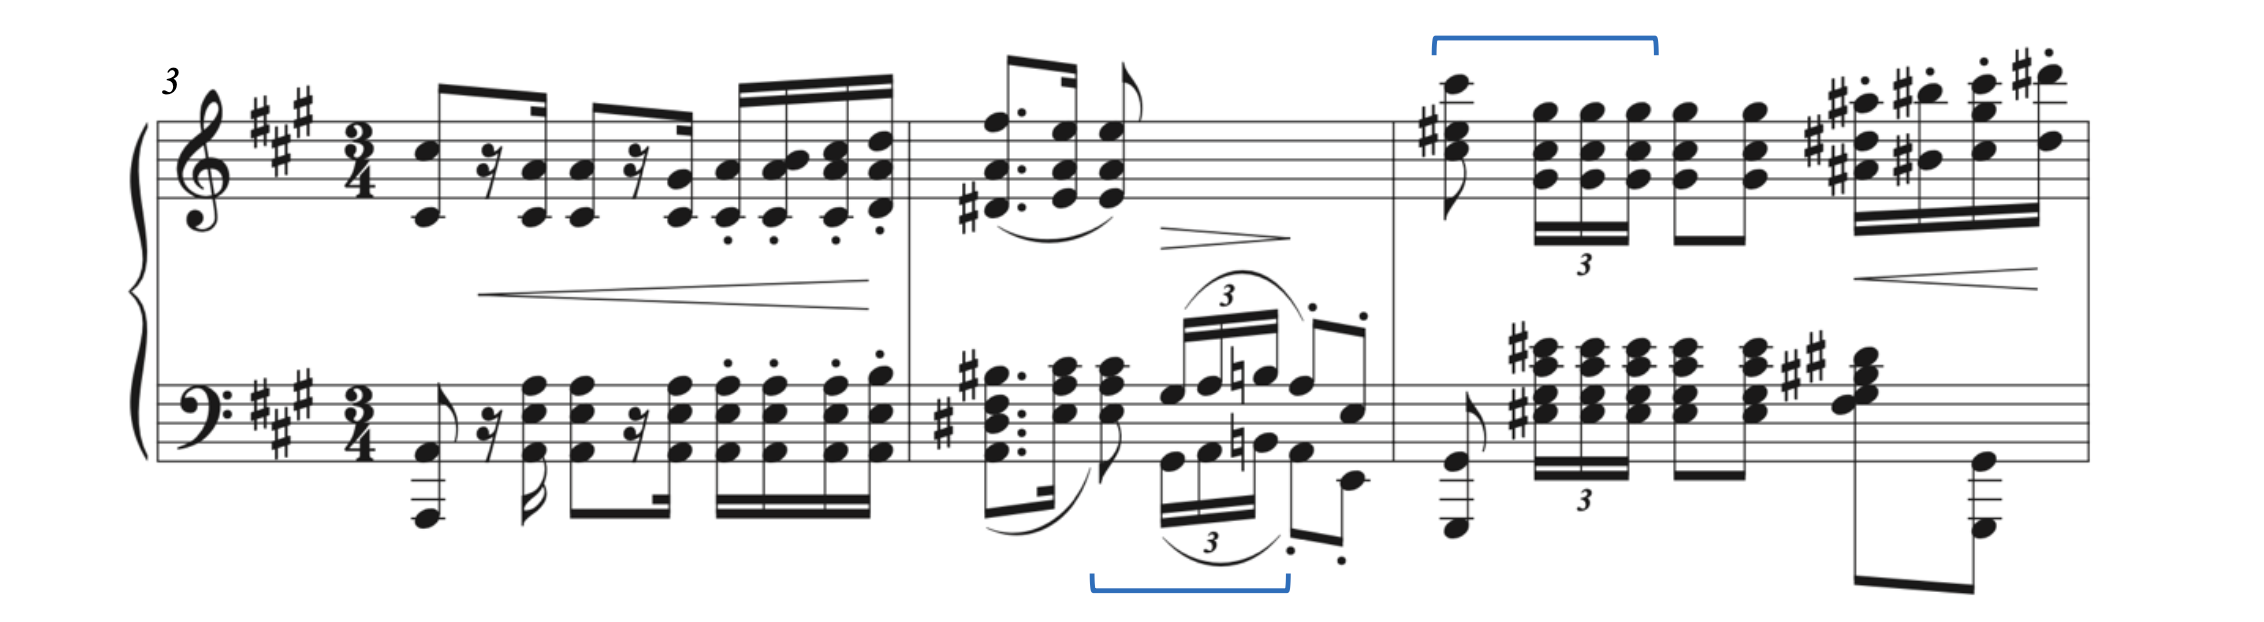 Triplets at the subdivision level in Chopin, Polonaise, op. 40, no. 1